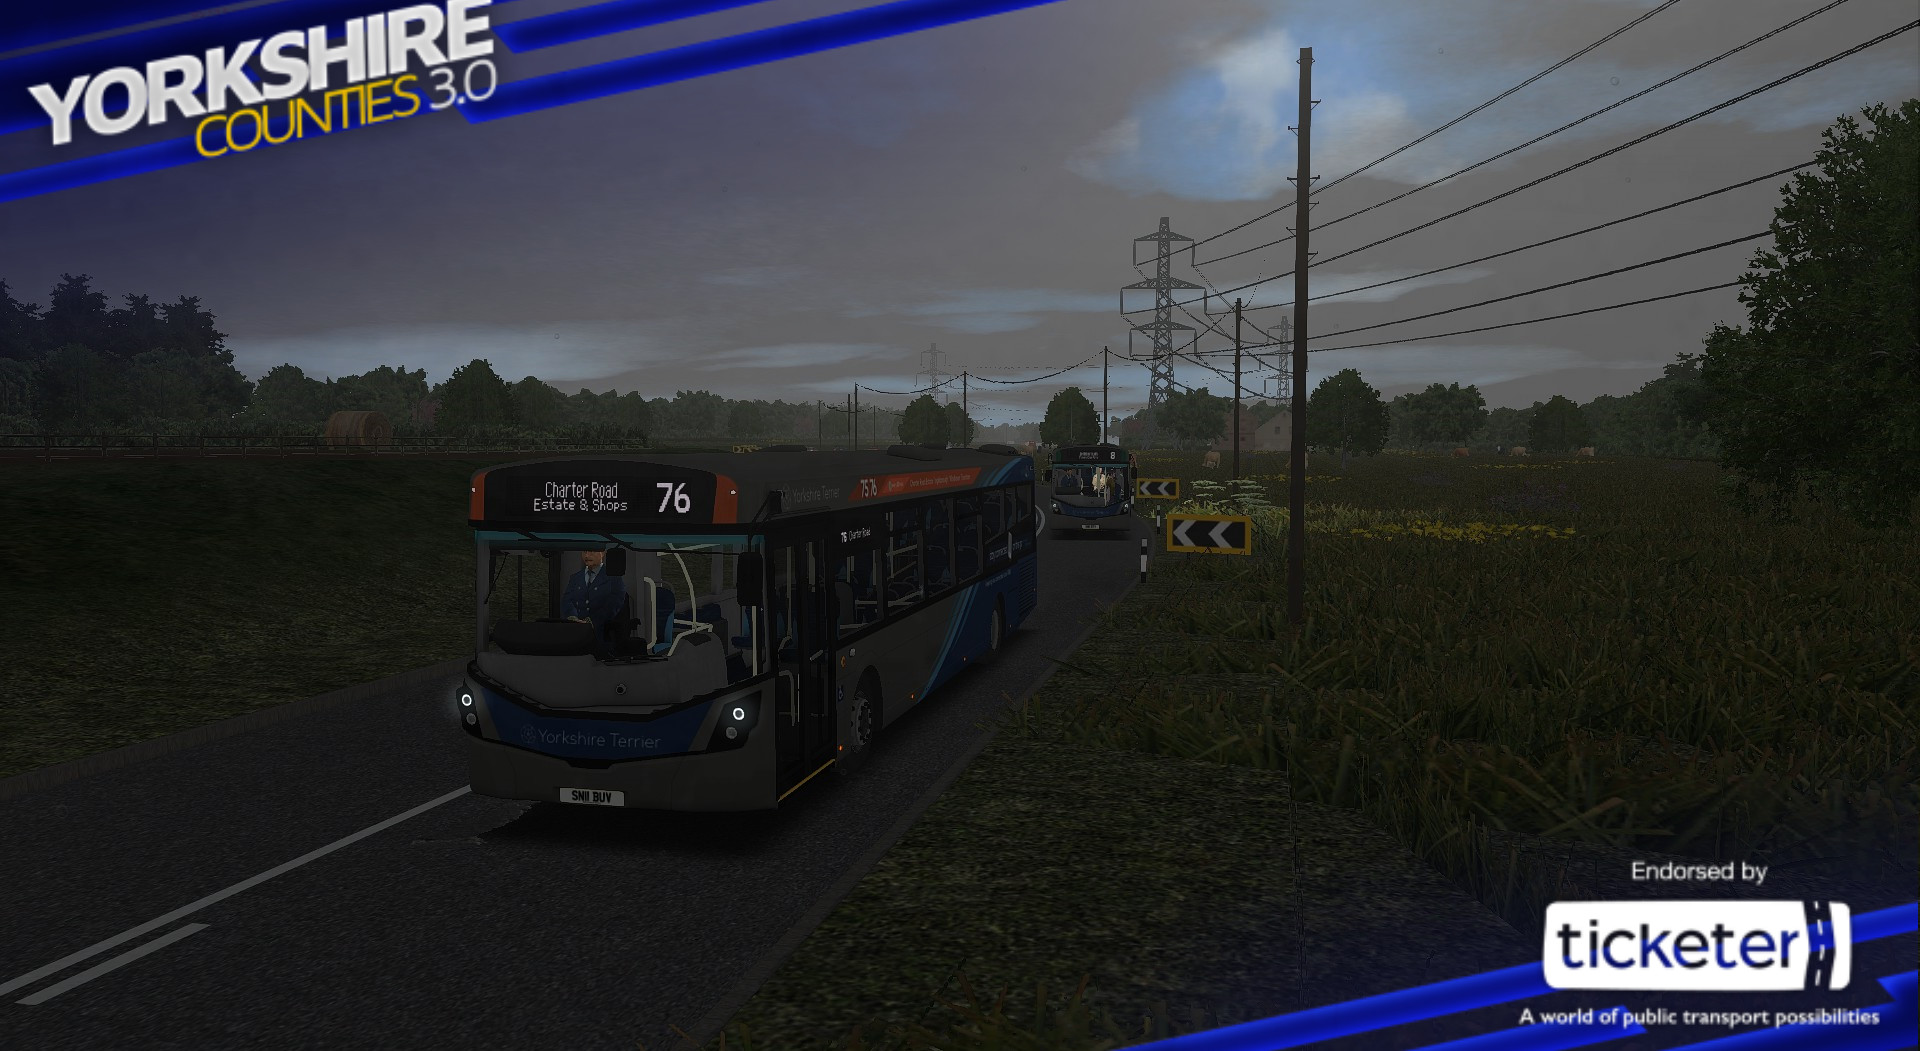 OMSI 2 Add-on Yorkshire Counties screenshot